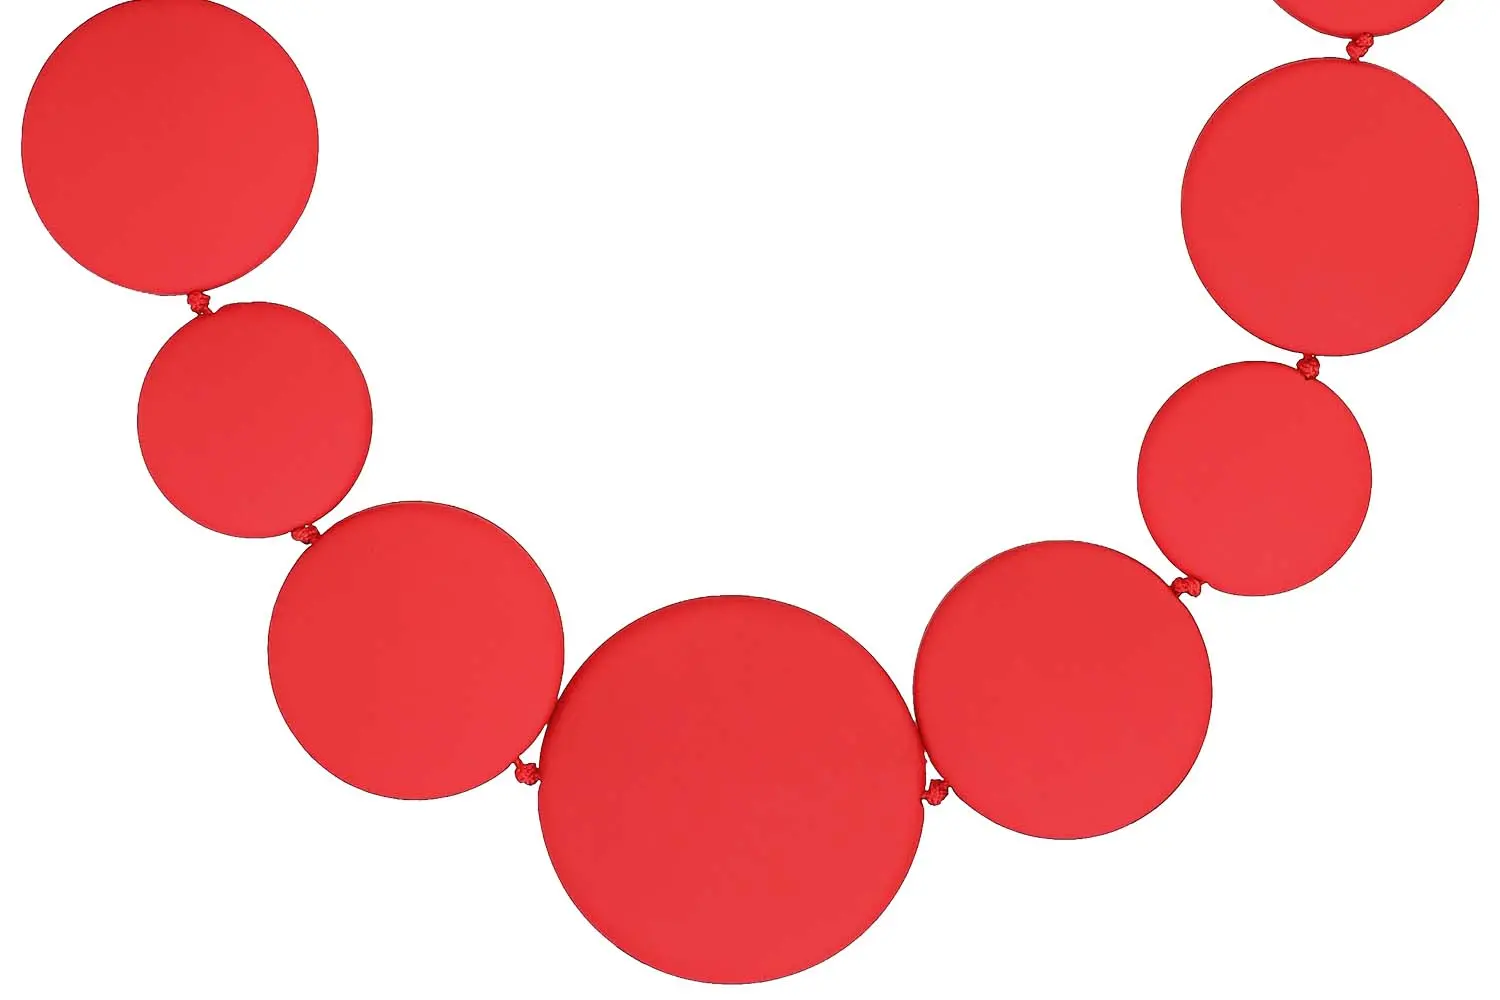 Collier - Red Circle